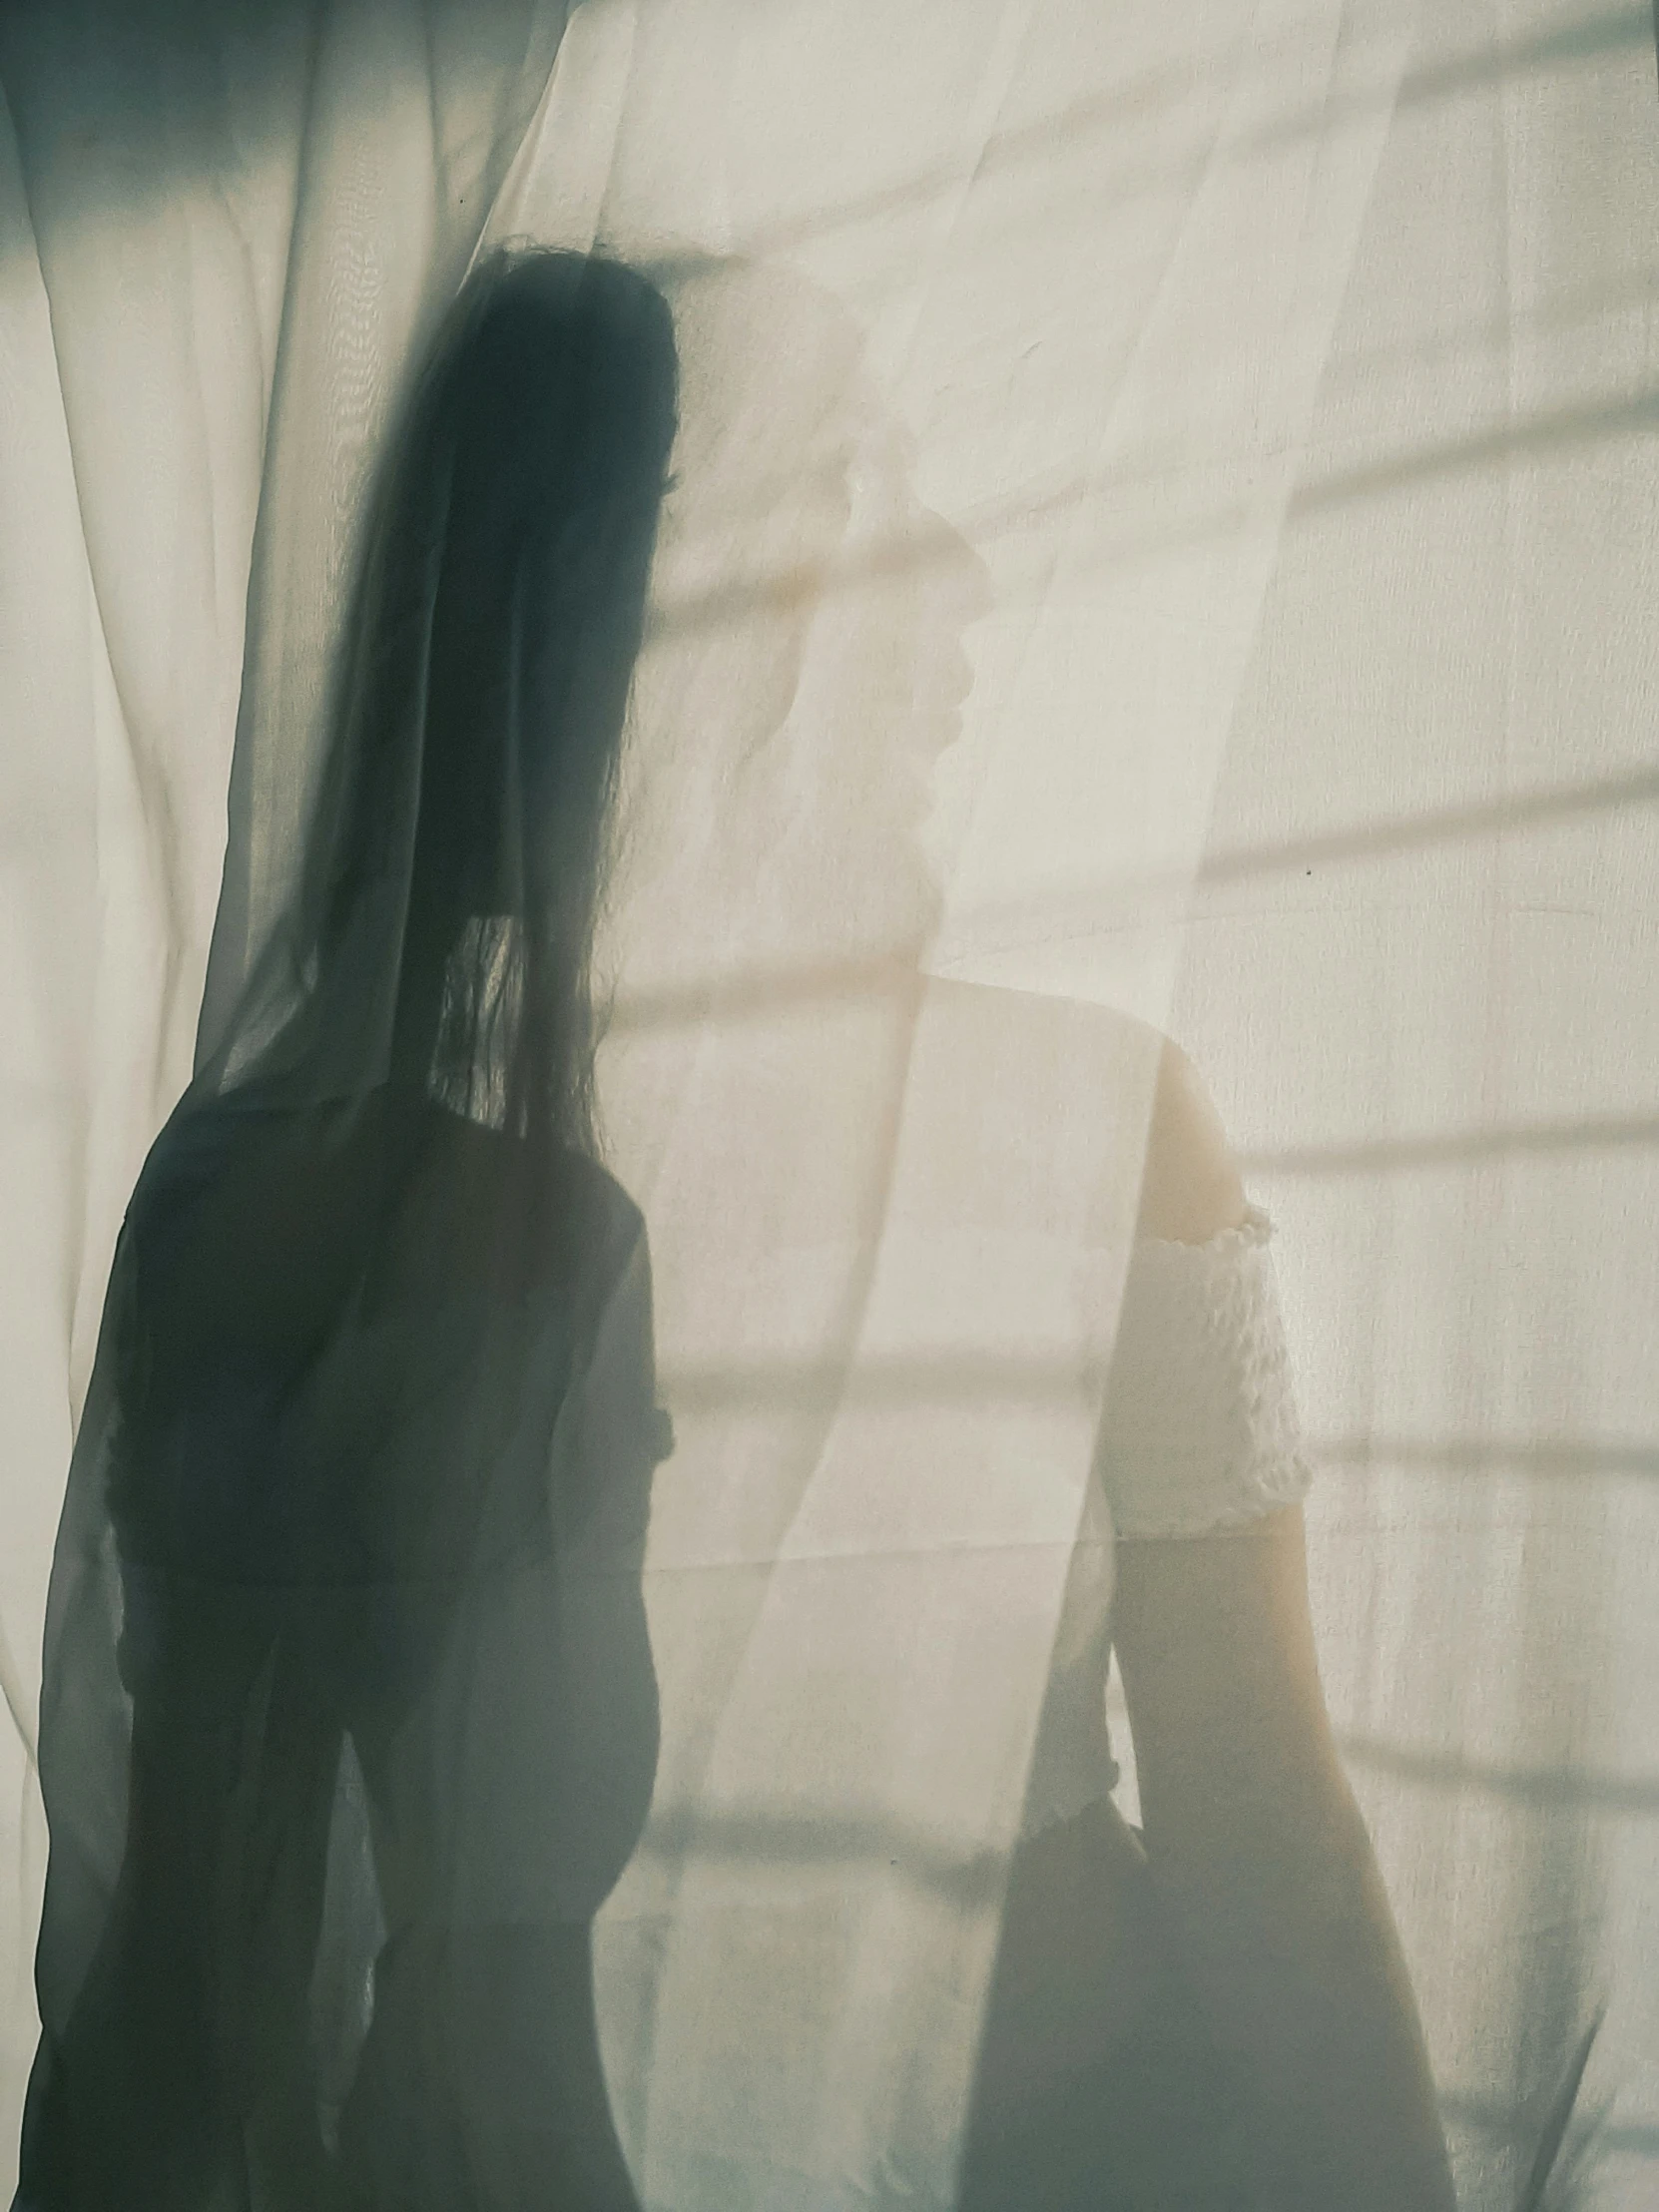 the woman is standing near the window in a dark room